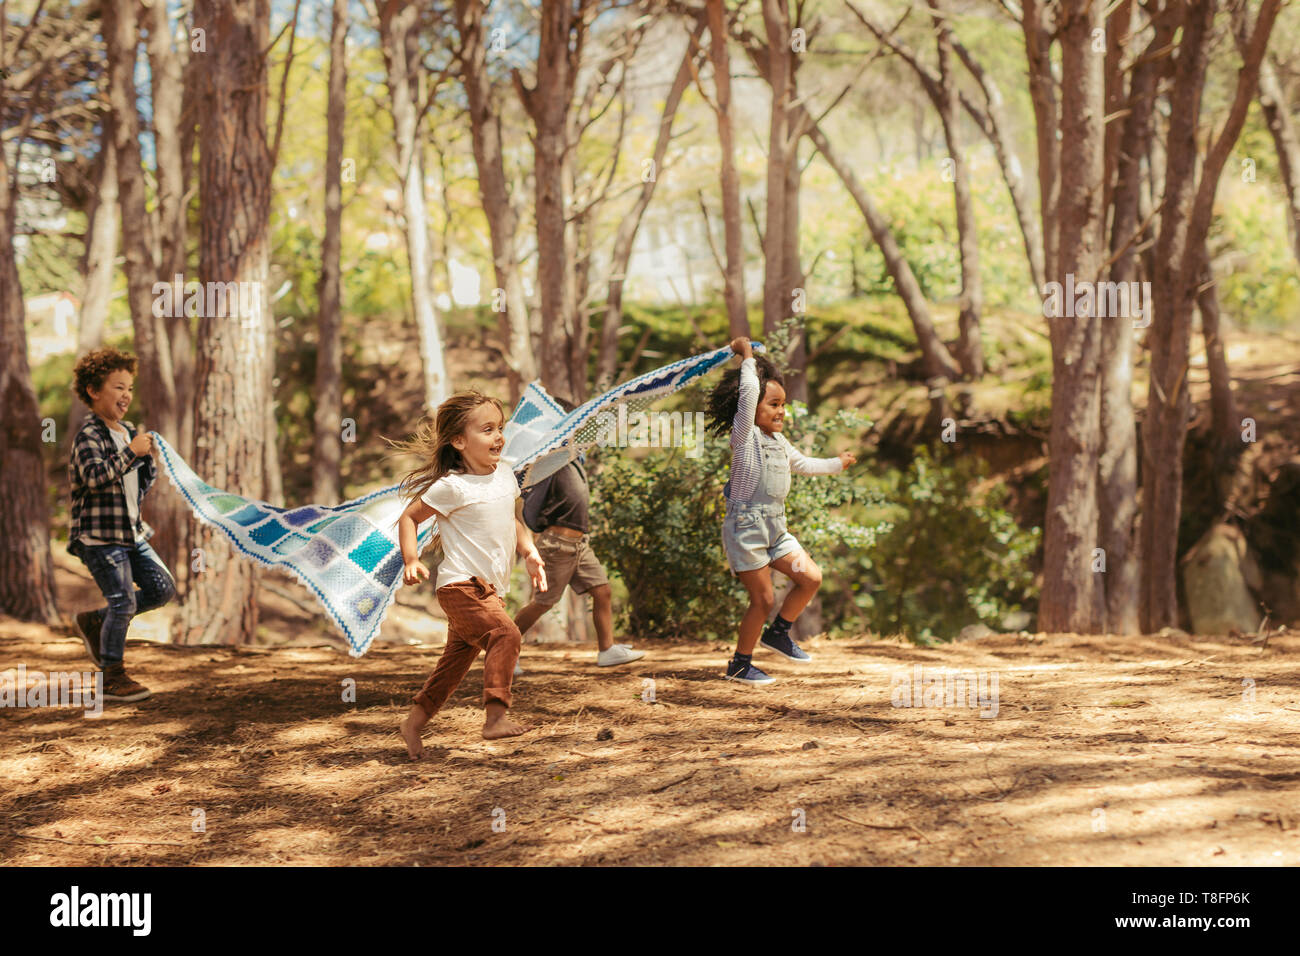 Four kids running in park with picnic blanket. Group of children enjoying together in park Stock Photo